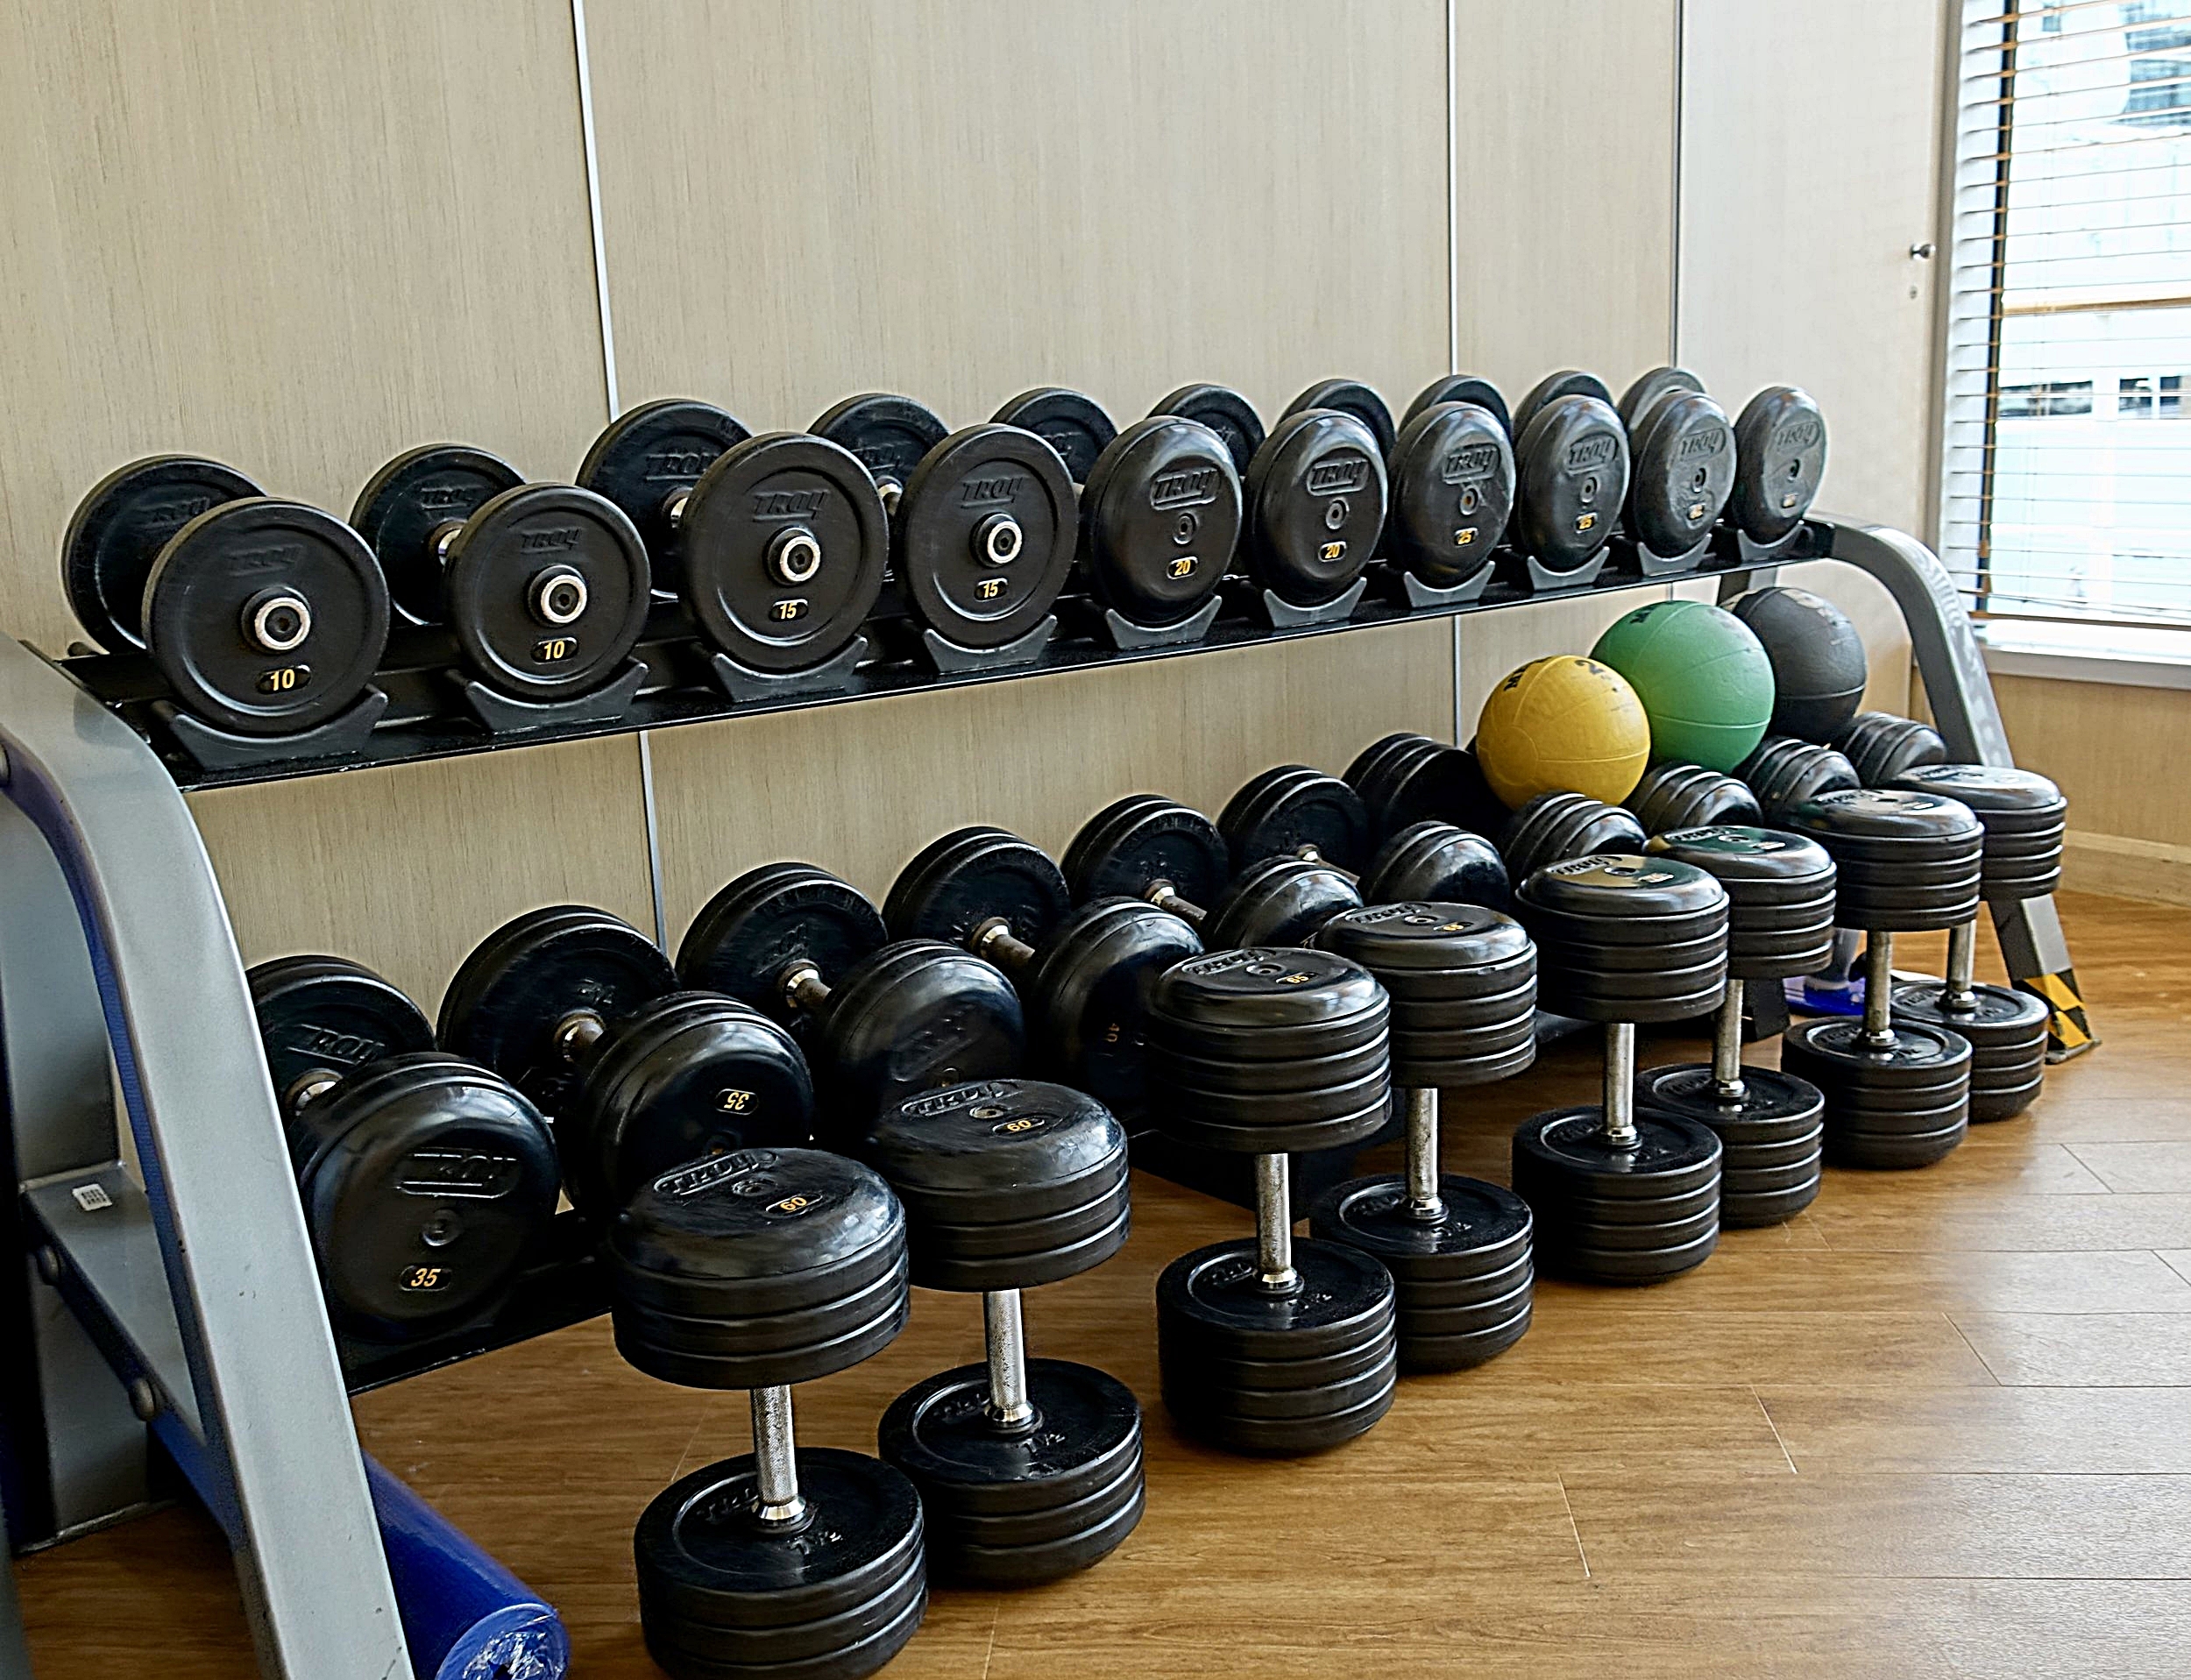  The separate weights room.  